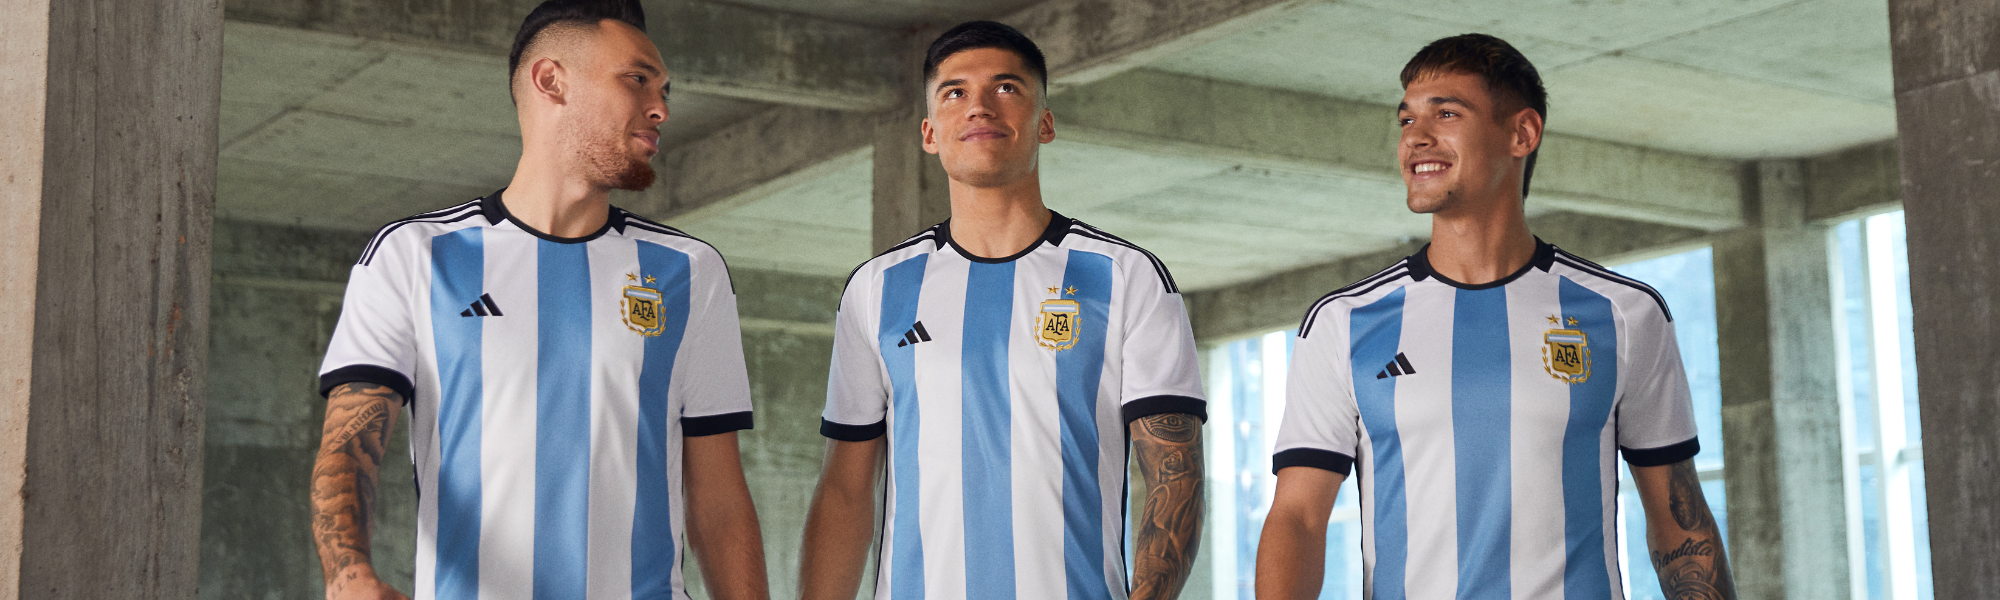 What is The Factory Directly Approved 2023 World Cup National Team Jerseys  Argentina Football Soccer Shirts Mexico England Uruguay